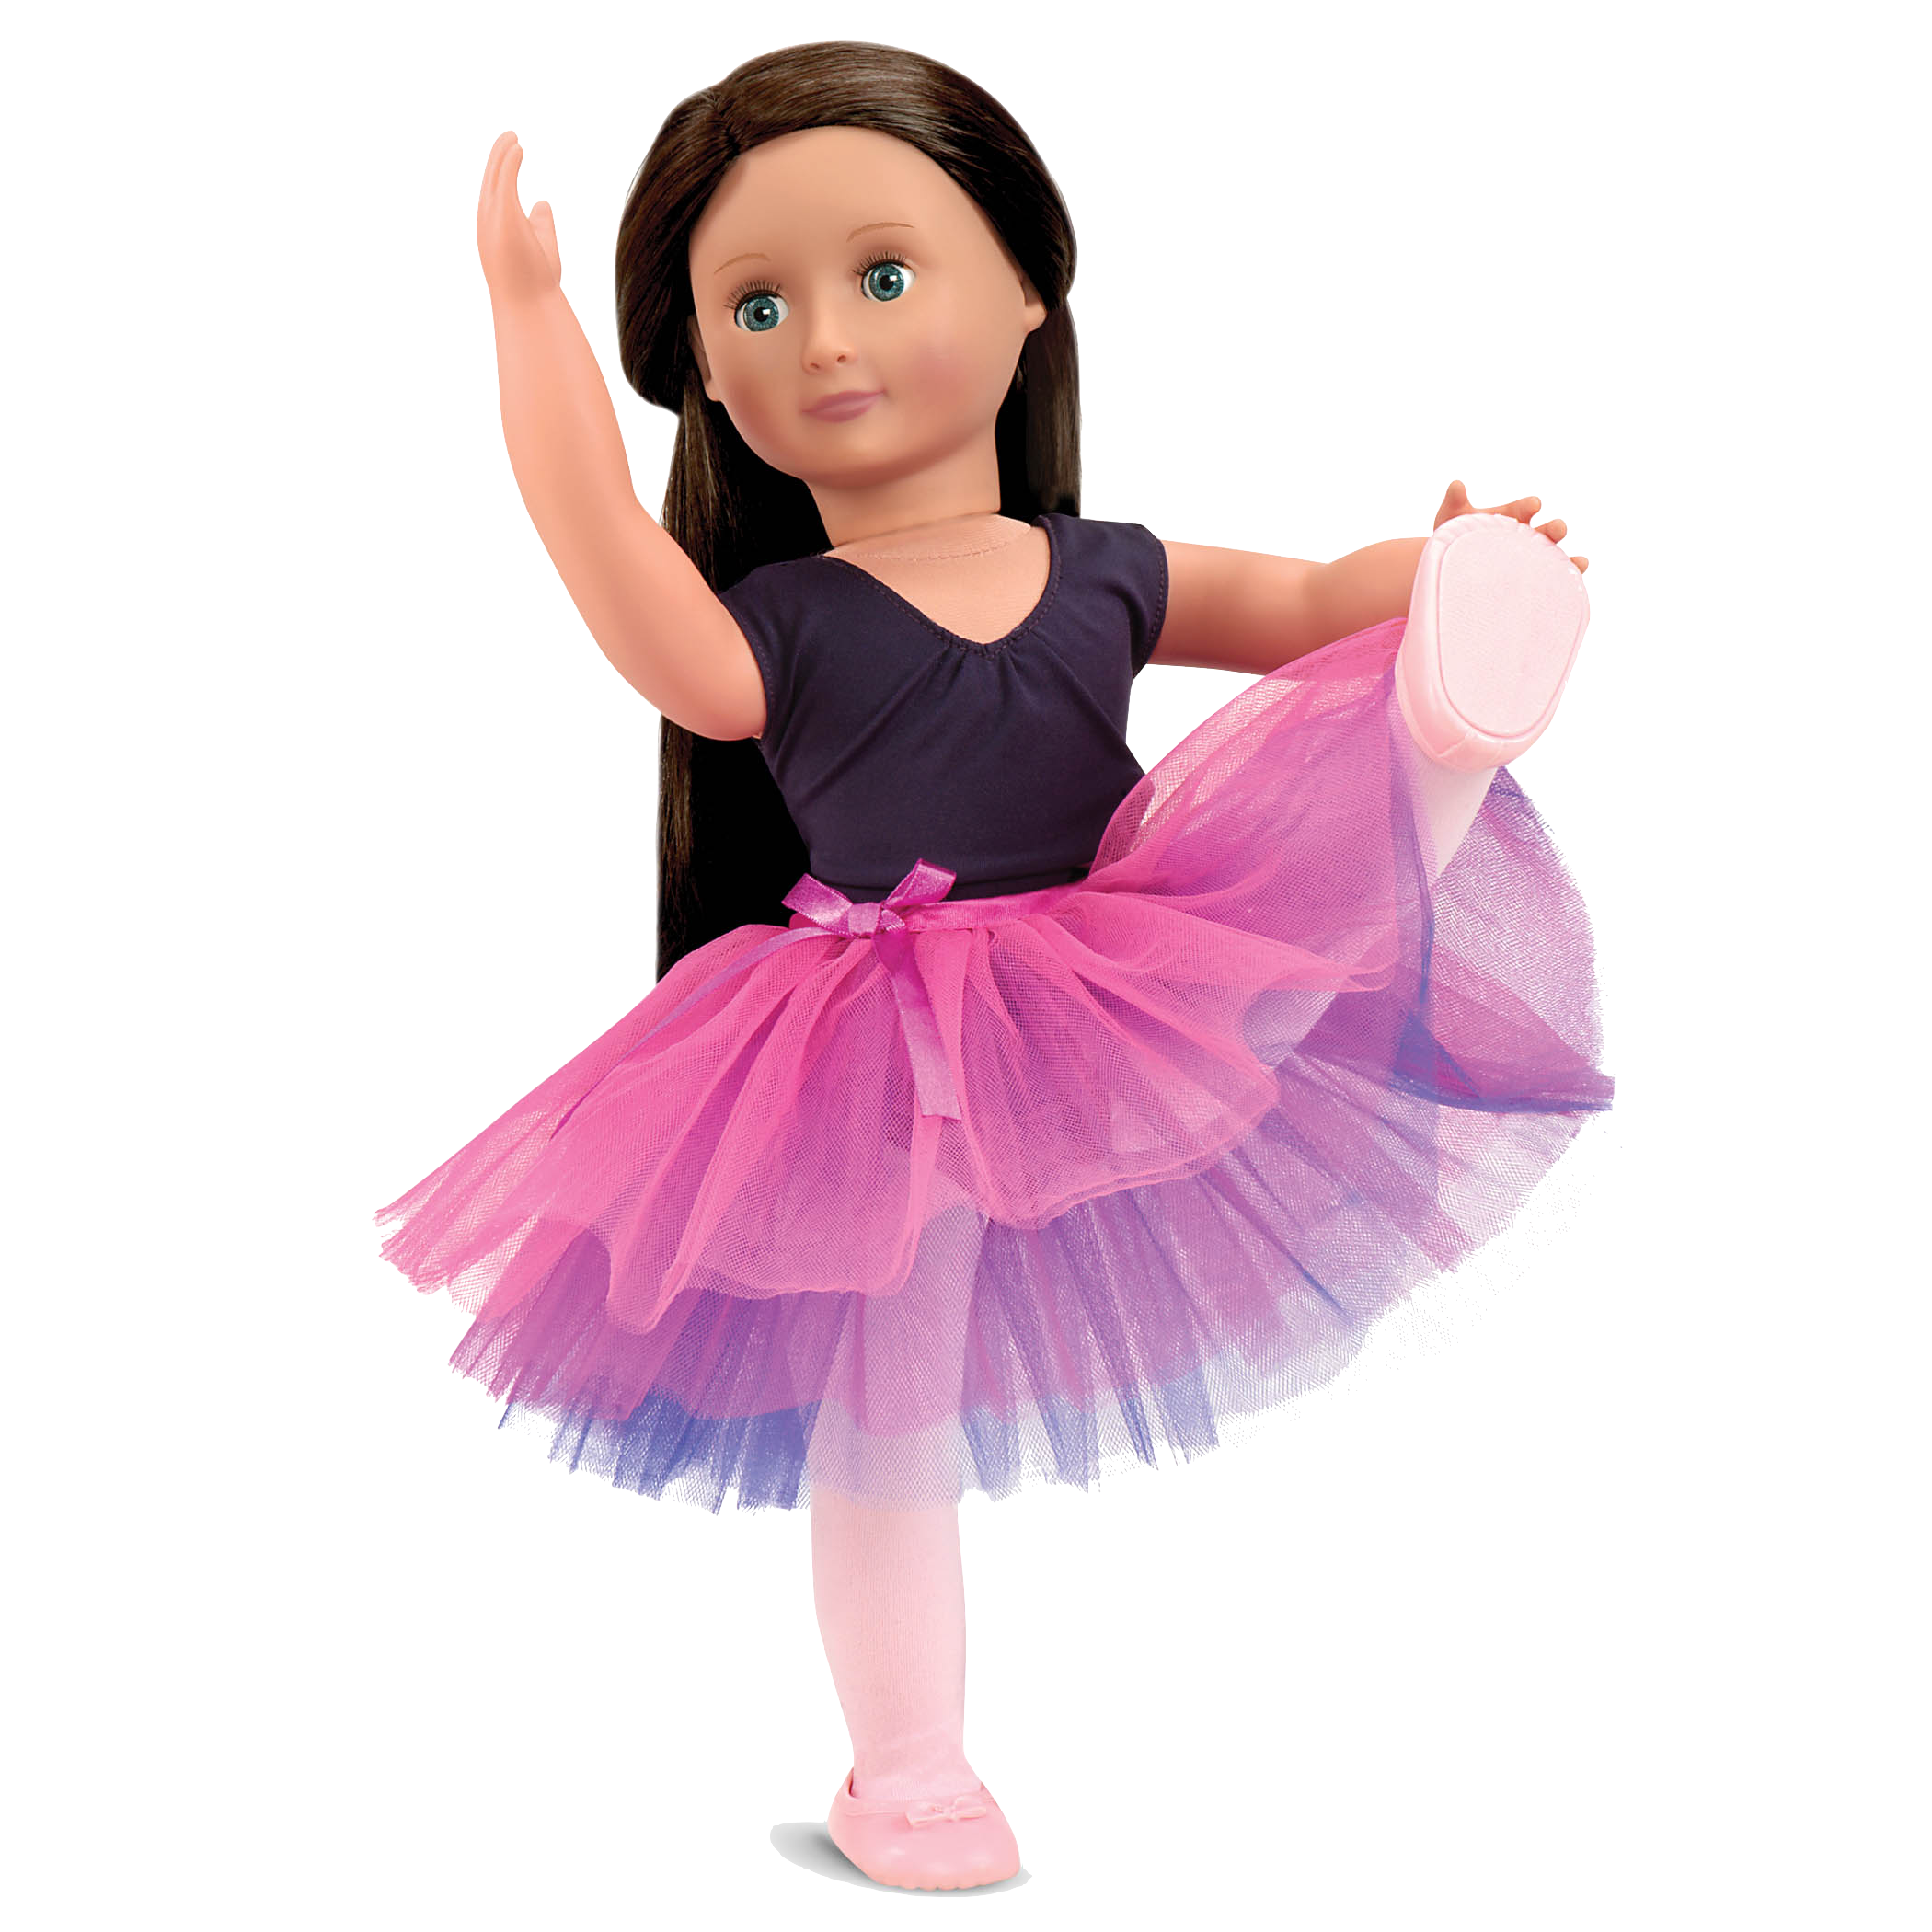 Dance Tulle You Drop ballet outfit Willow wearing